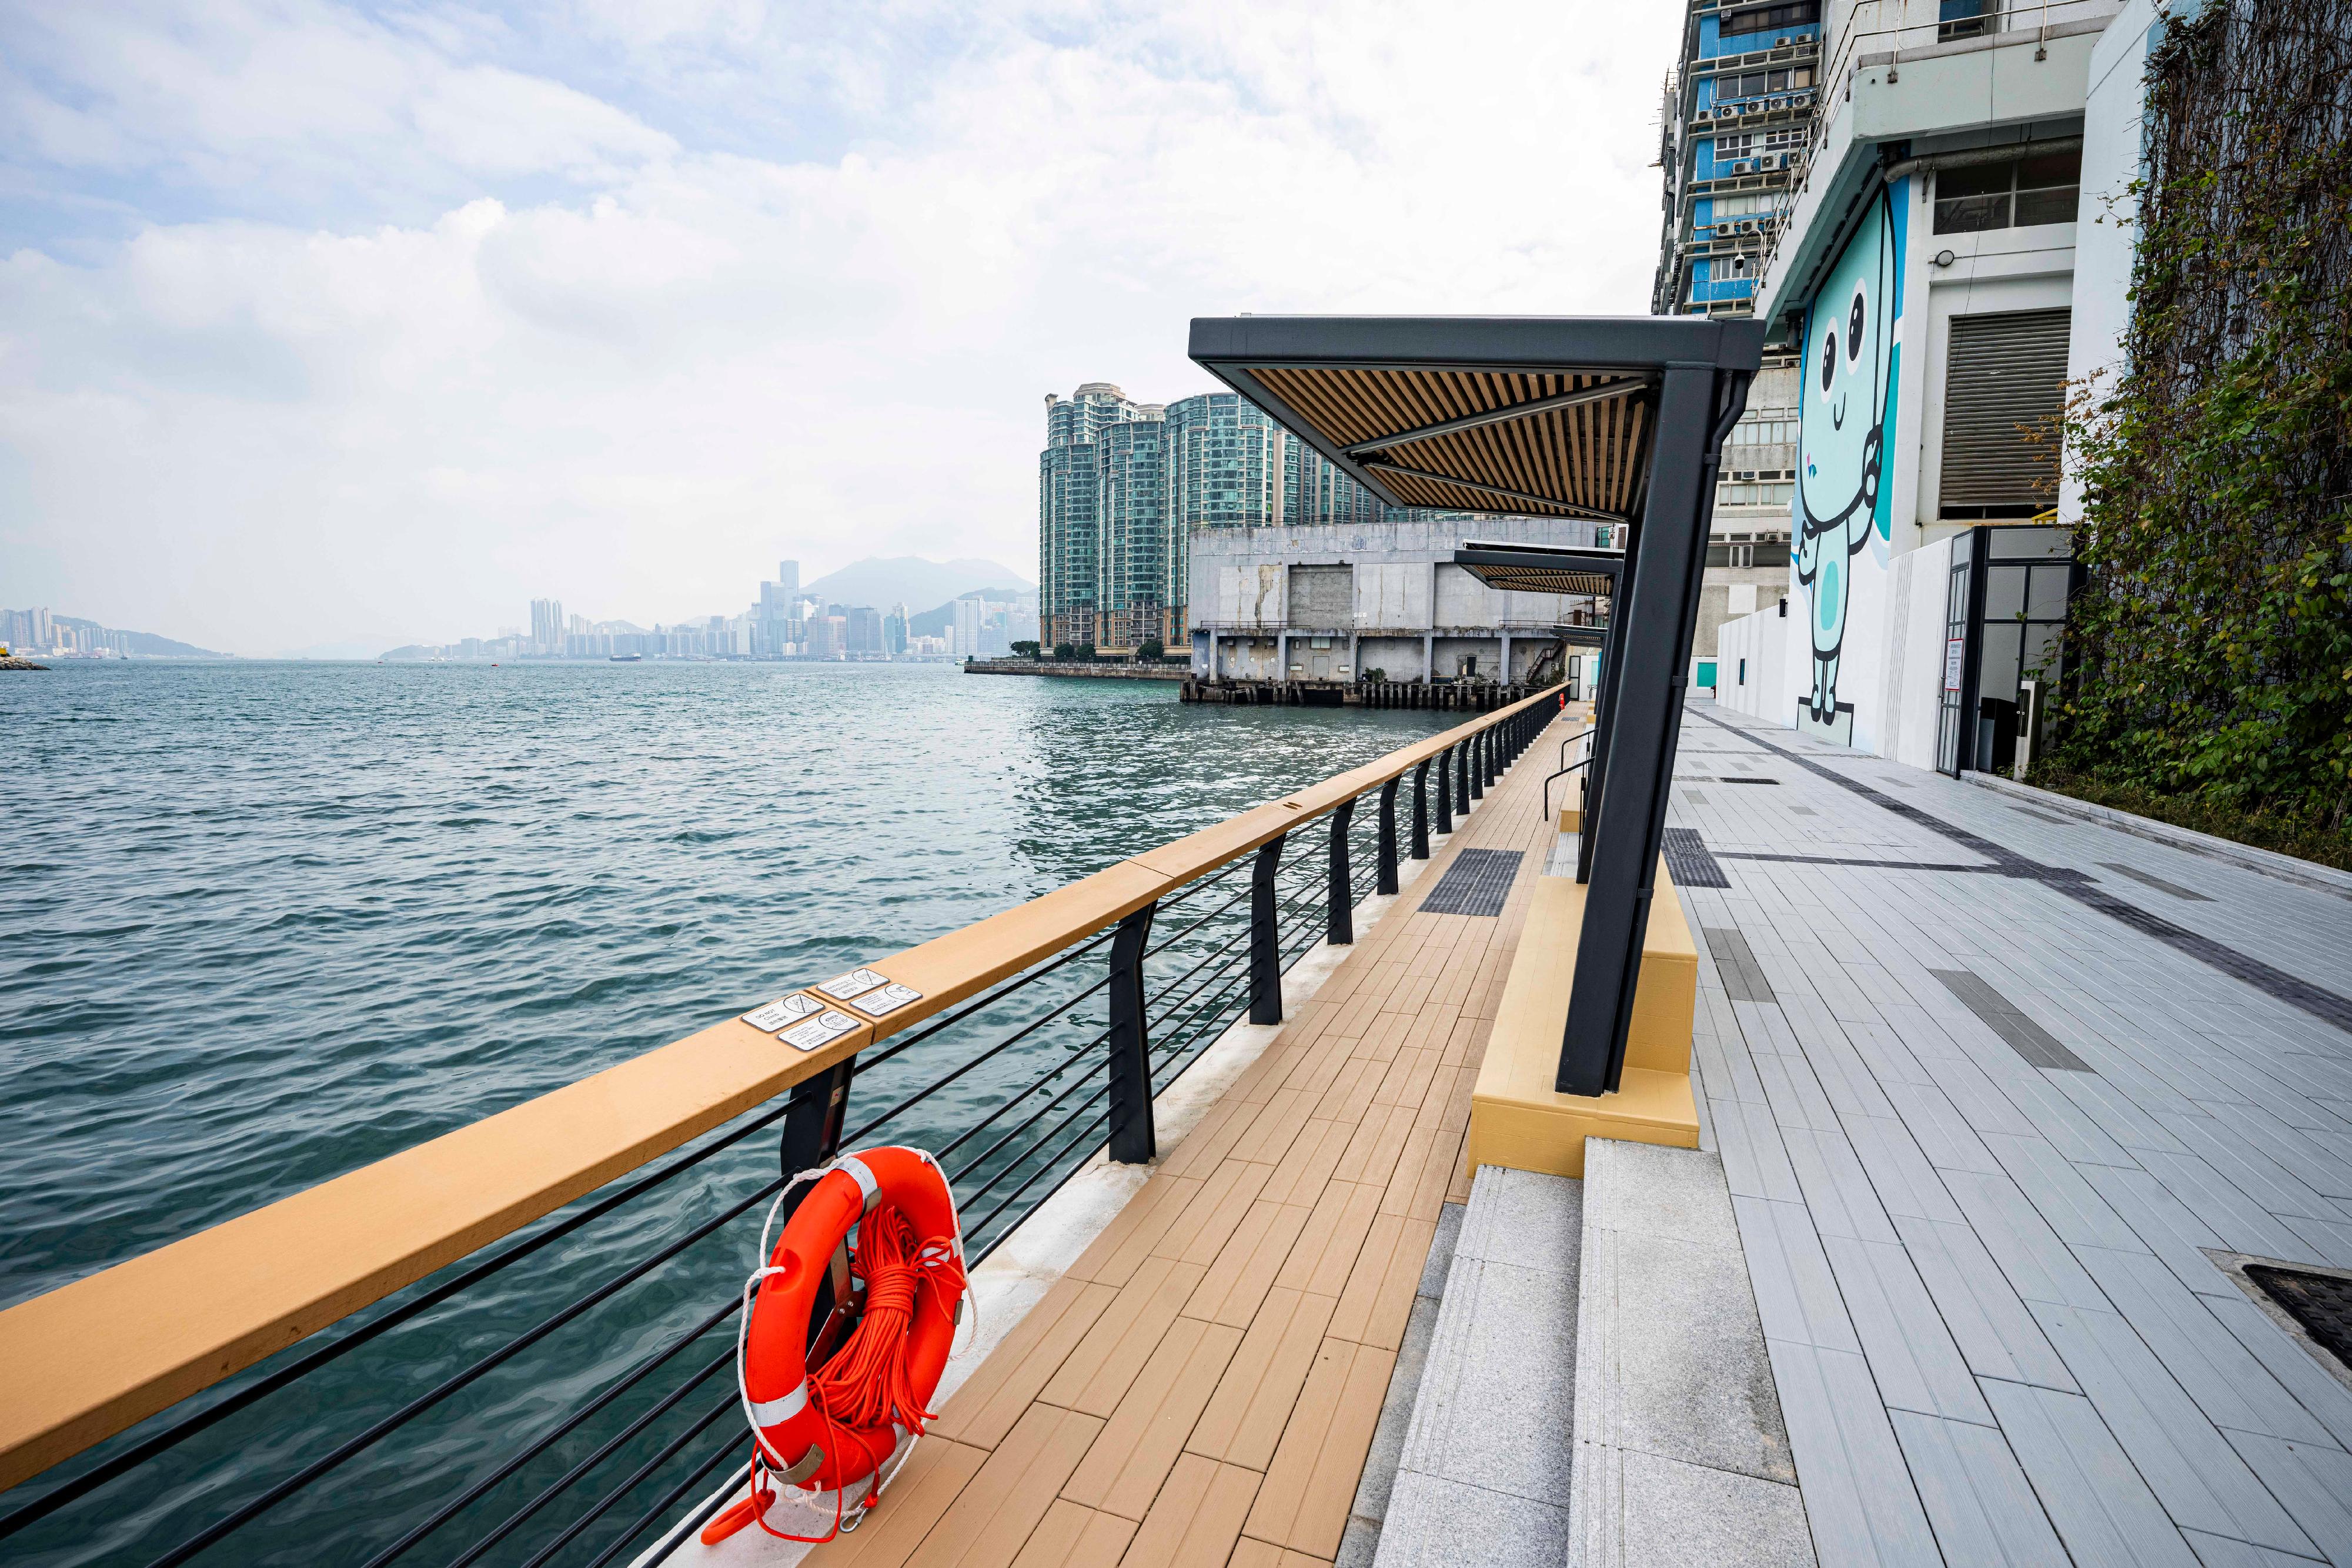 The To Kwa Wan Promenade is open for public use from today (December 21). Photo shows the benches at the To Kwa Wan Promenade. 